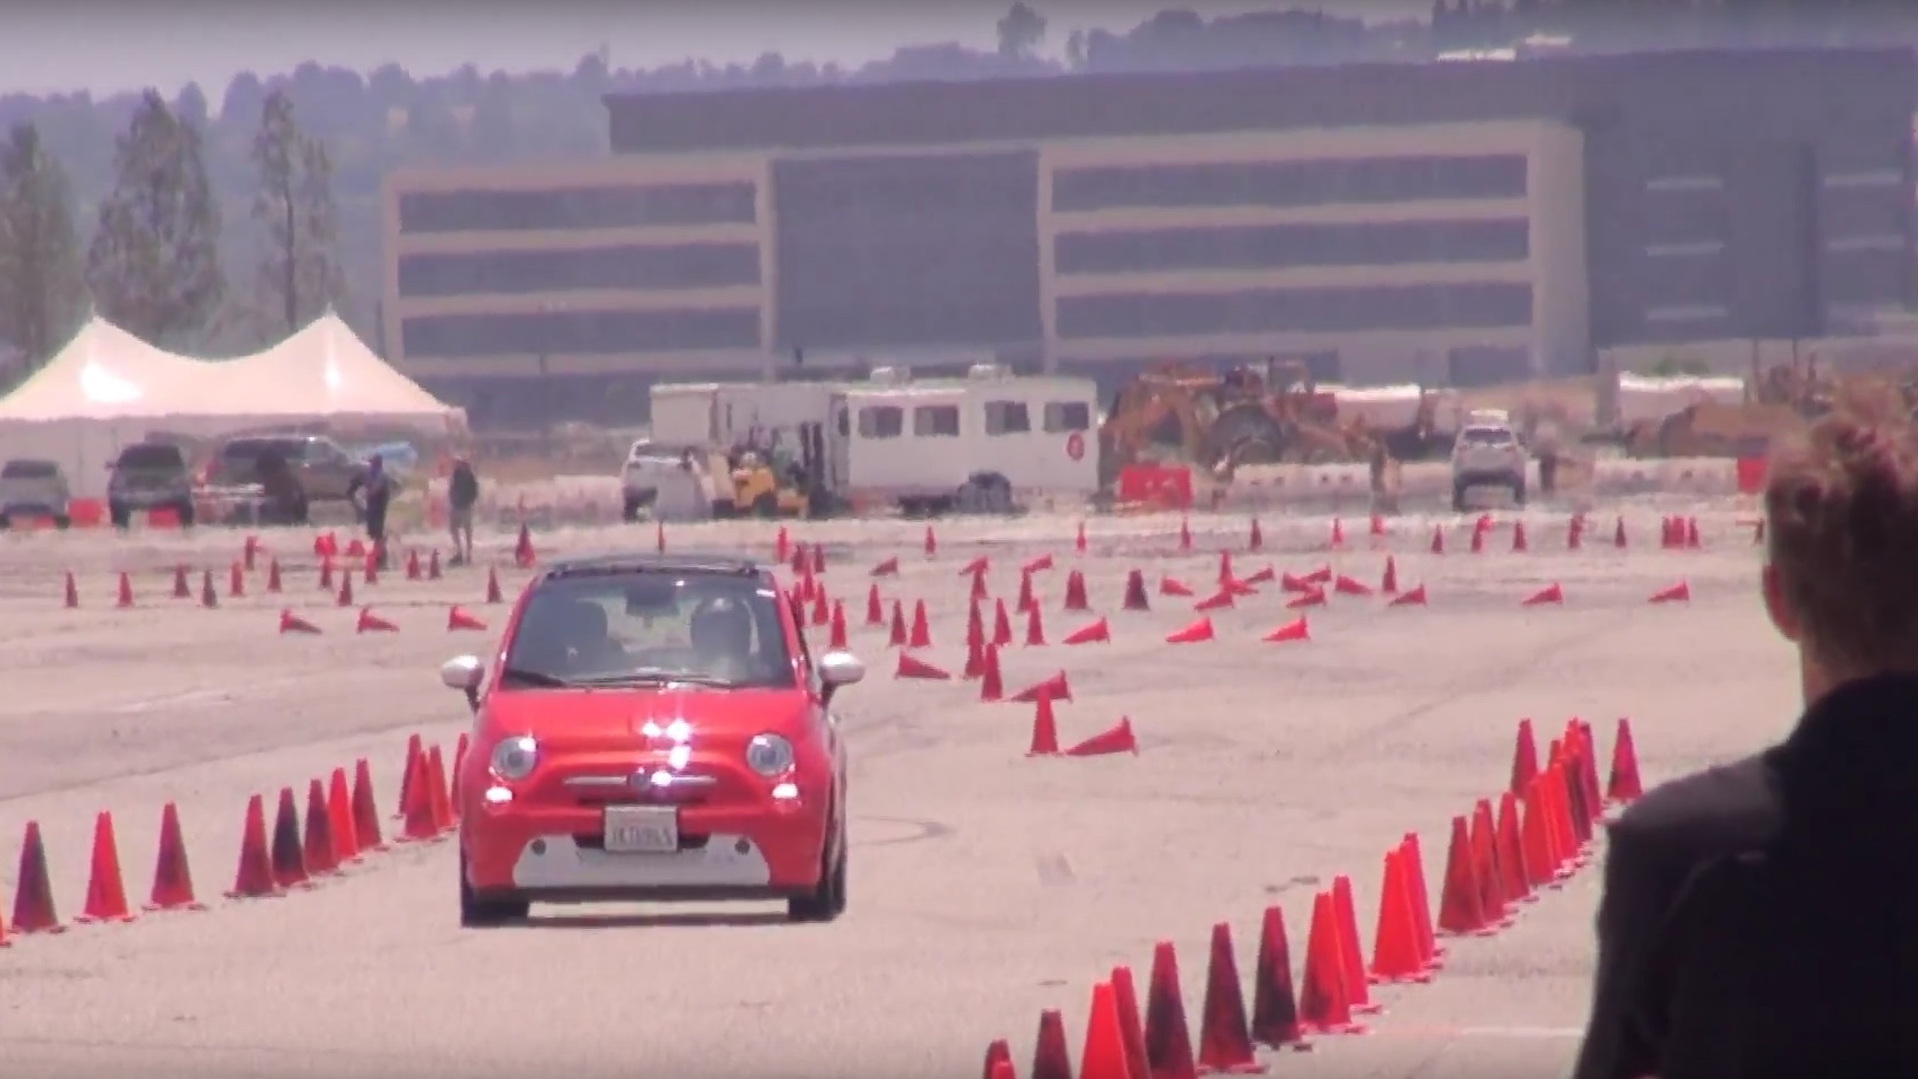 Andrea Kerr driving Fiat 500e electric car in autocross, Great Park, Irvine, Califronia, July 2017